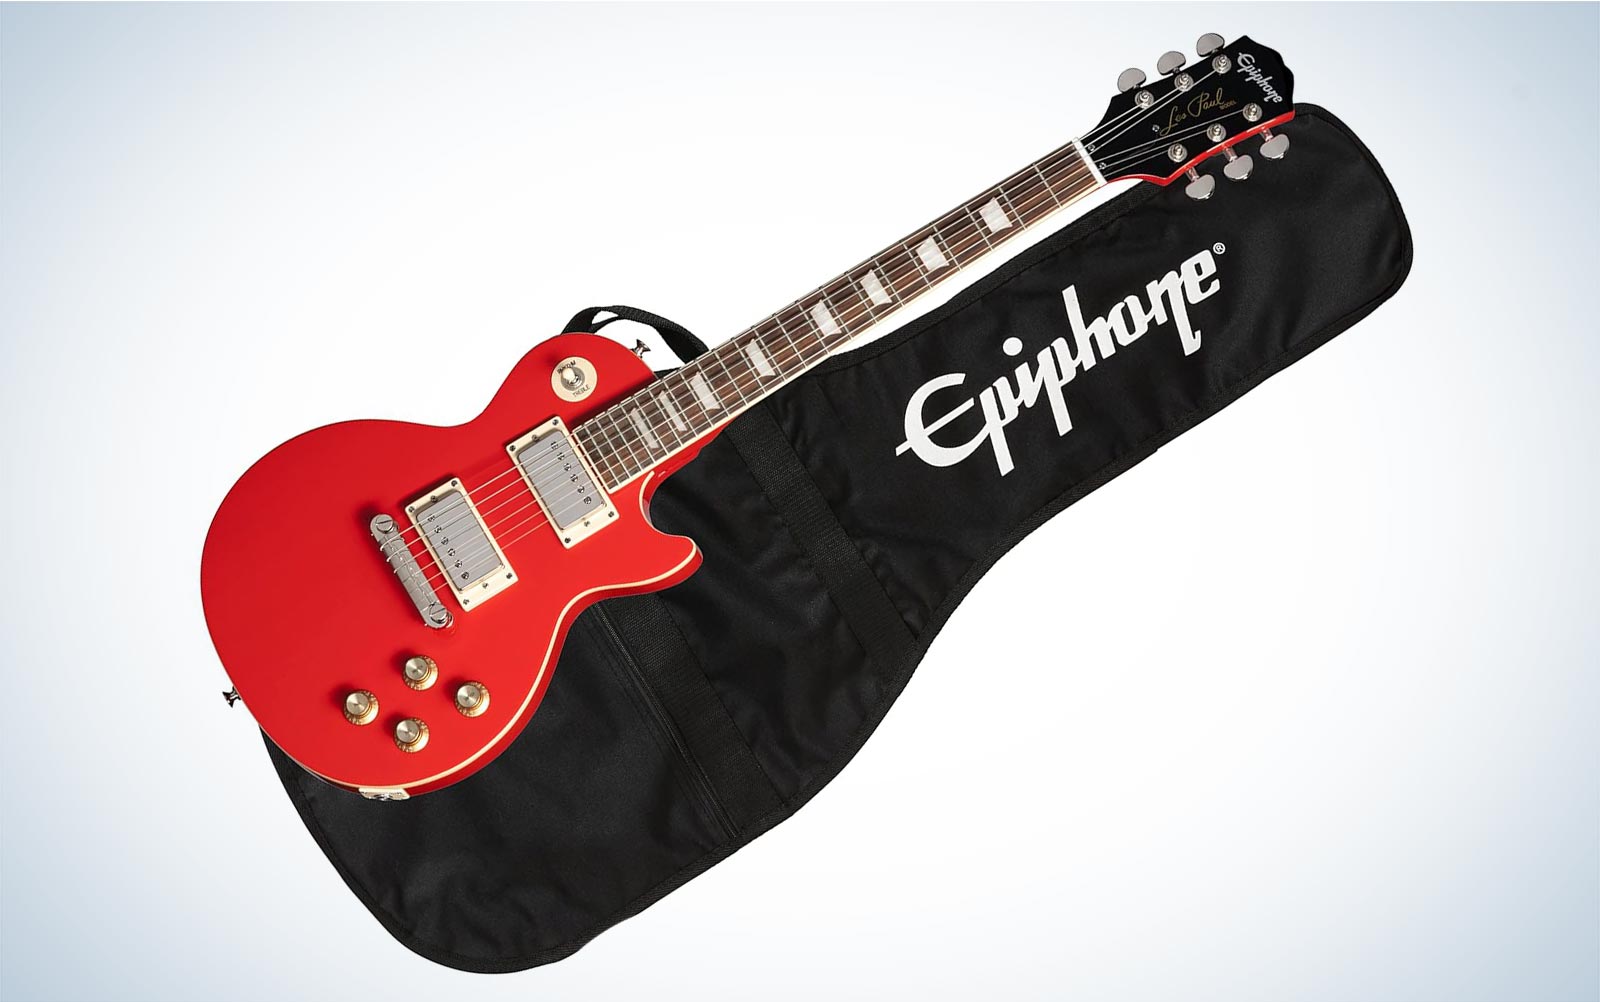 A red Epiphone Power Player Les Paul guitar leaning to the right on its case on a plain background